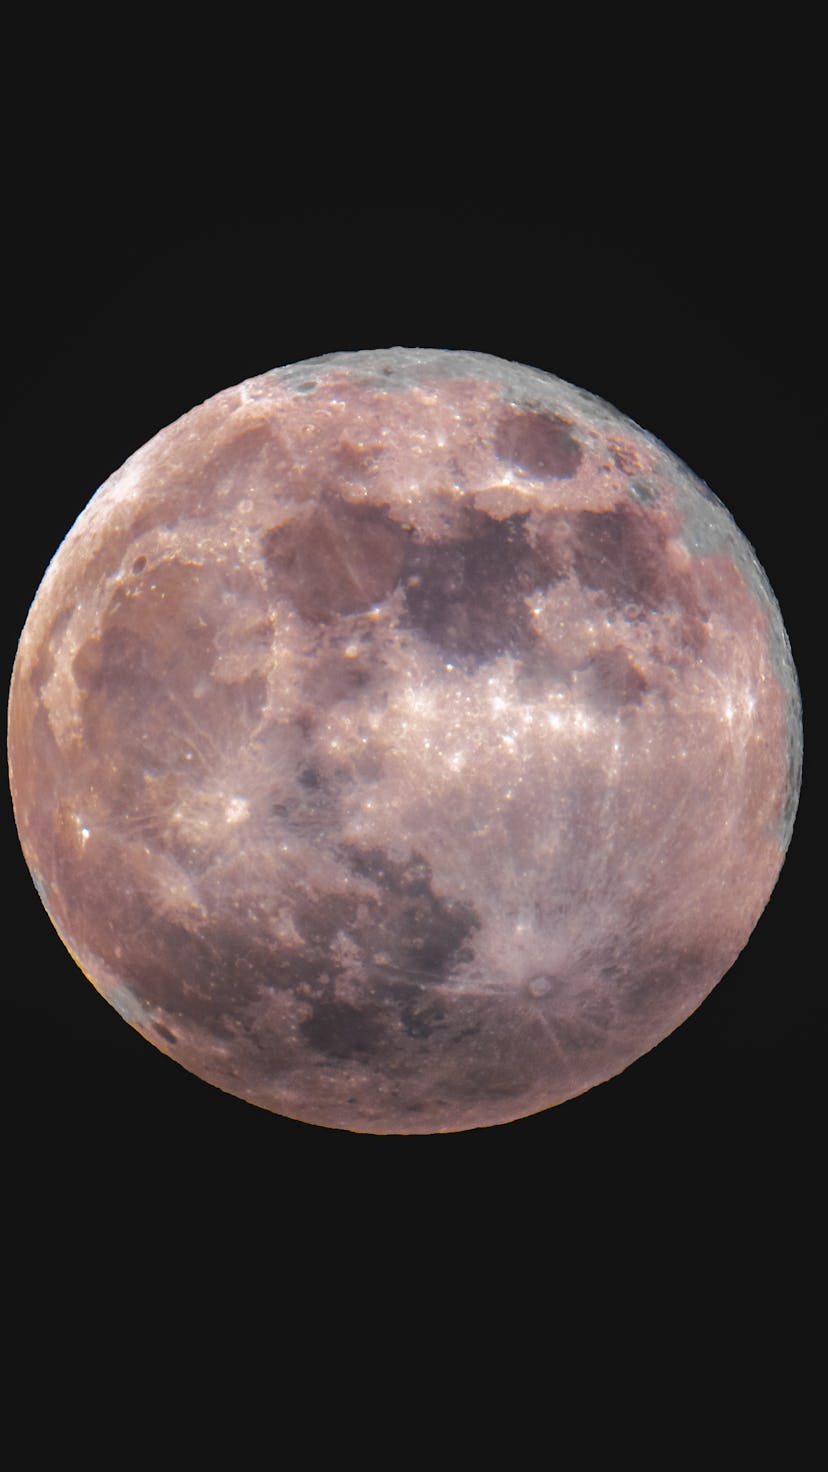 The June 2021 full moon is the first lunation of the summer.